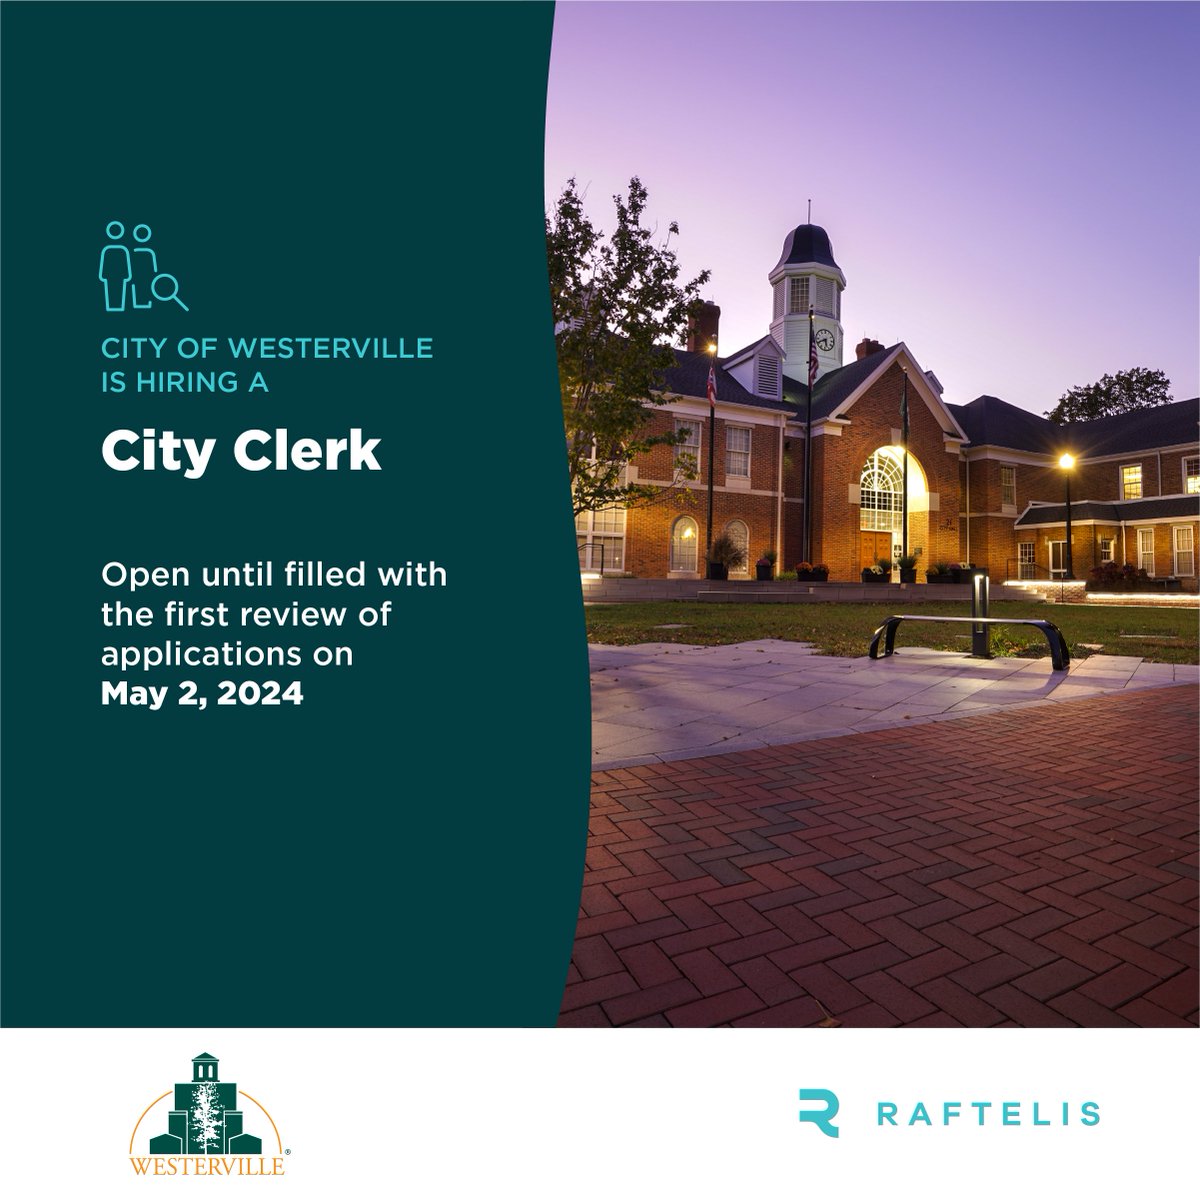 You still have time to apply to be the City of Westerville, Ohio's next City Clerk! The City Clerk is a vital part of the City of Westerville’s ongoing success story.
 
Learn more and apply here: hubs.la/Q02v9H8p0

#Jobs #Career #CareerOpportunity